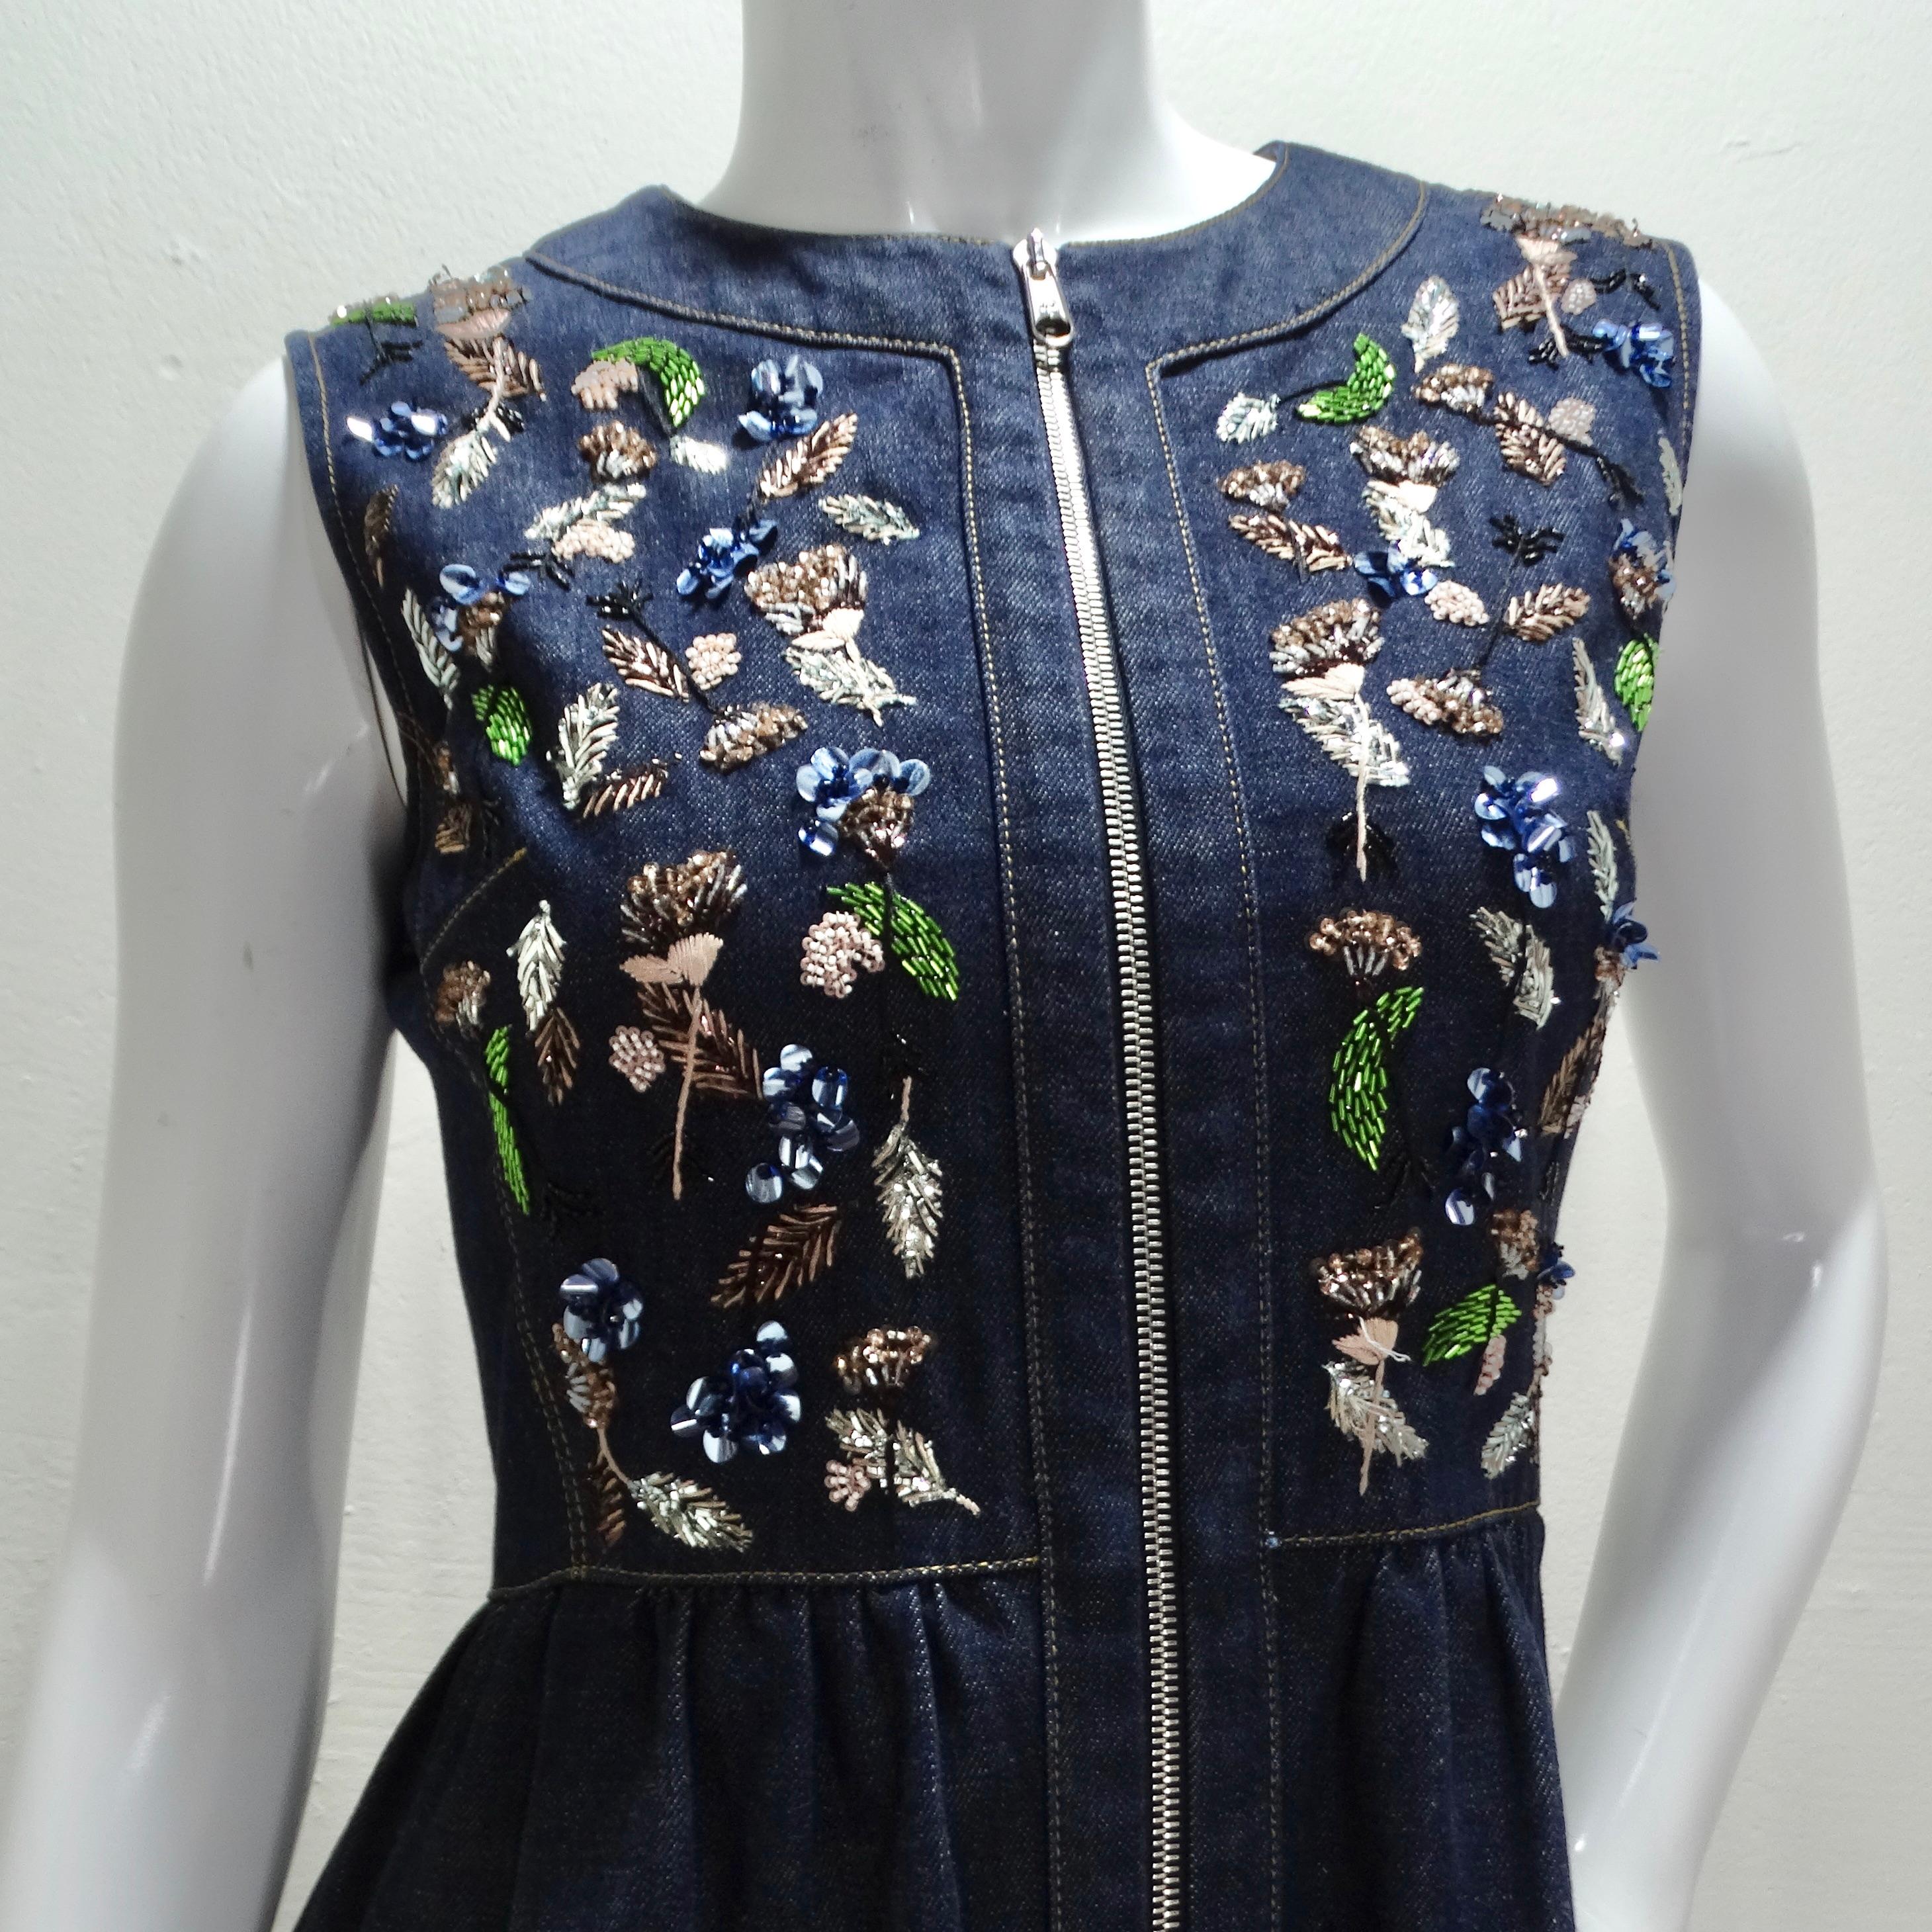 The Christian Dior Denim Embroidered Sleeveless Dress is a stunning and unique piece that combines timeless denim with whimsical floral embroidery, creating a charming statement dress. The sleeveless style adds a touch of modernity to the classic